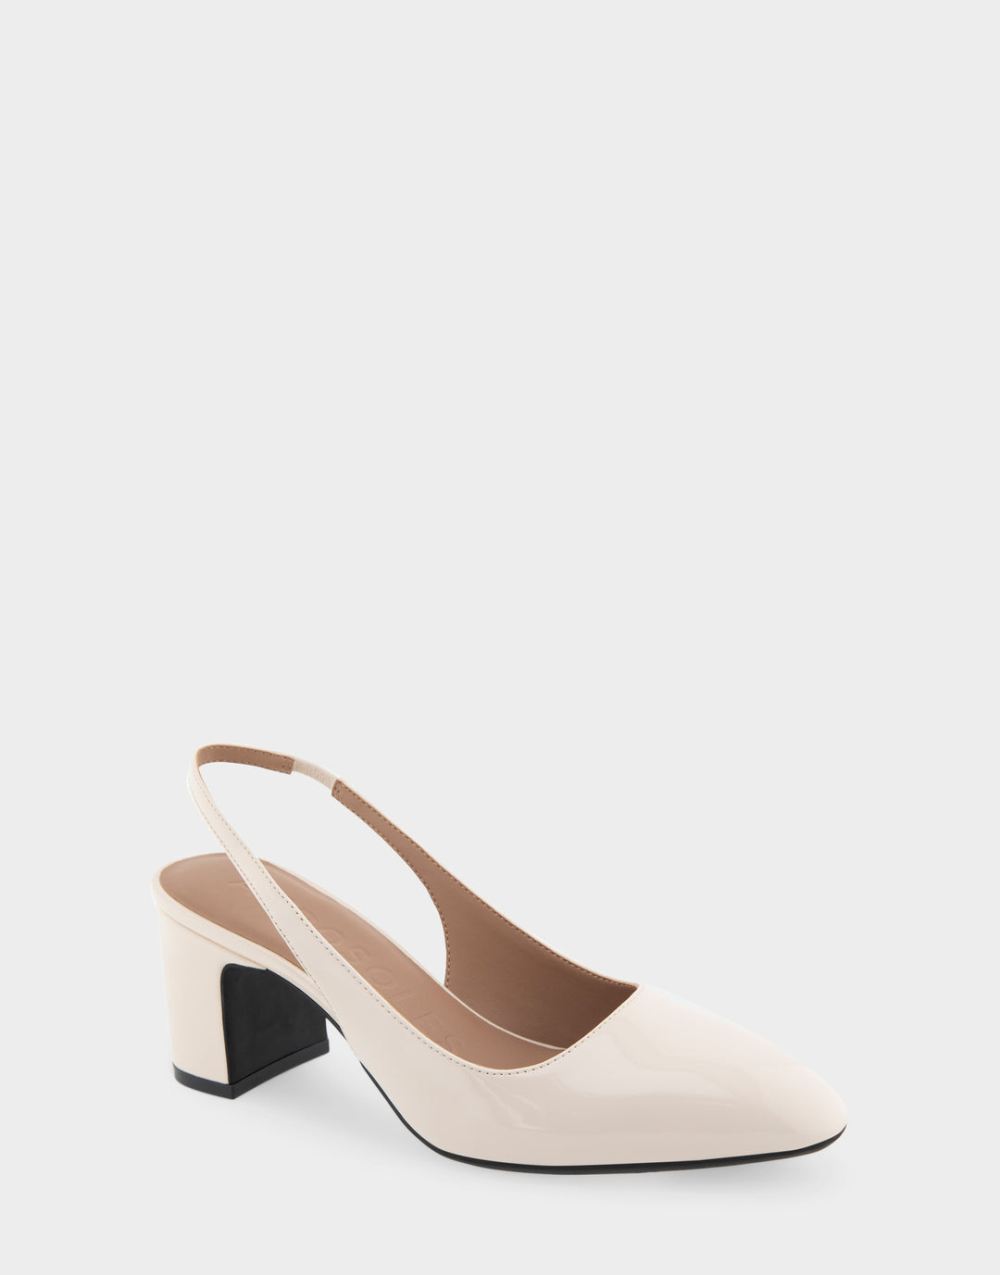 Women's | Mags Eggnog Patent Faux Leather Slingback Mid-Heel Pump